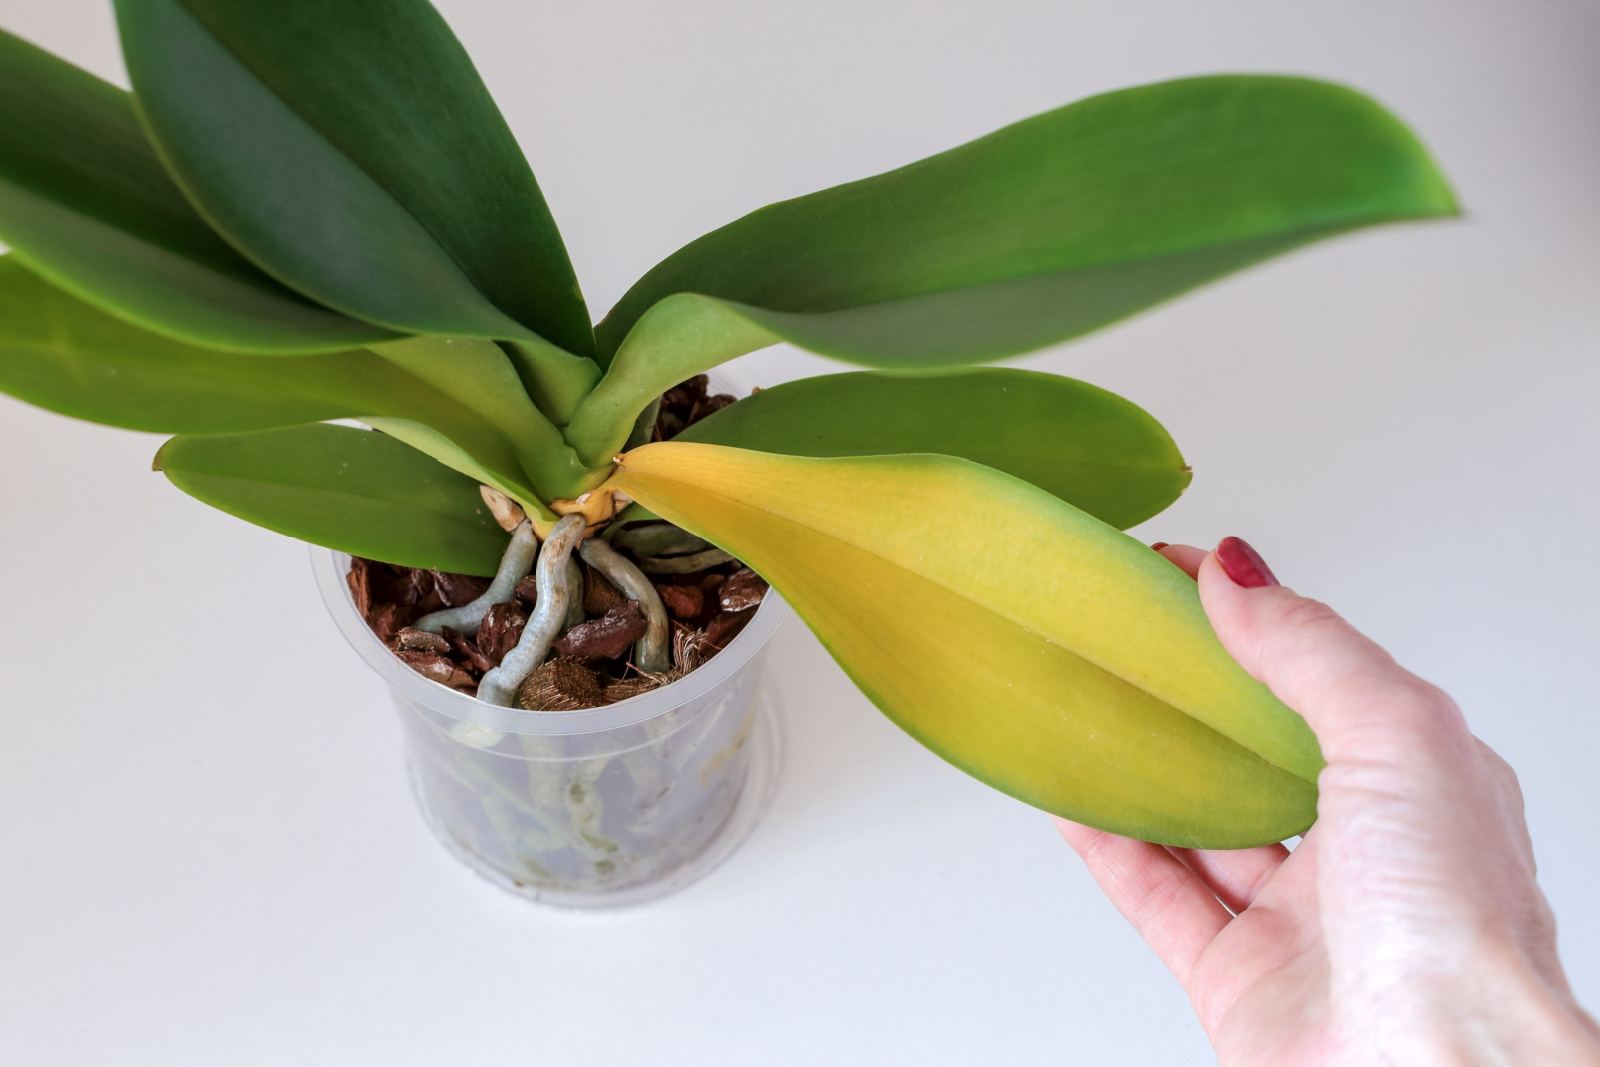 Orchid leaves turn yellow due to improper care